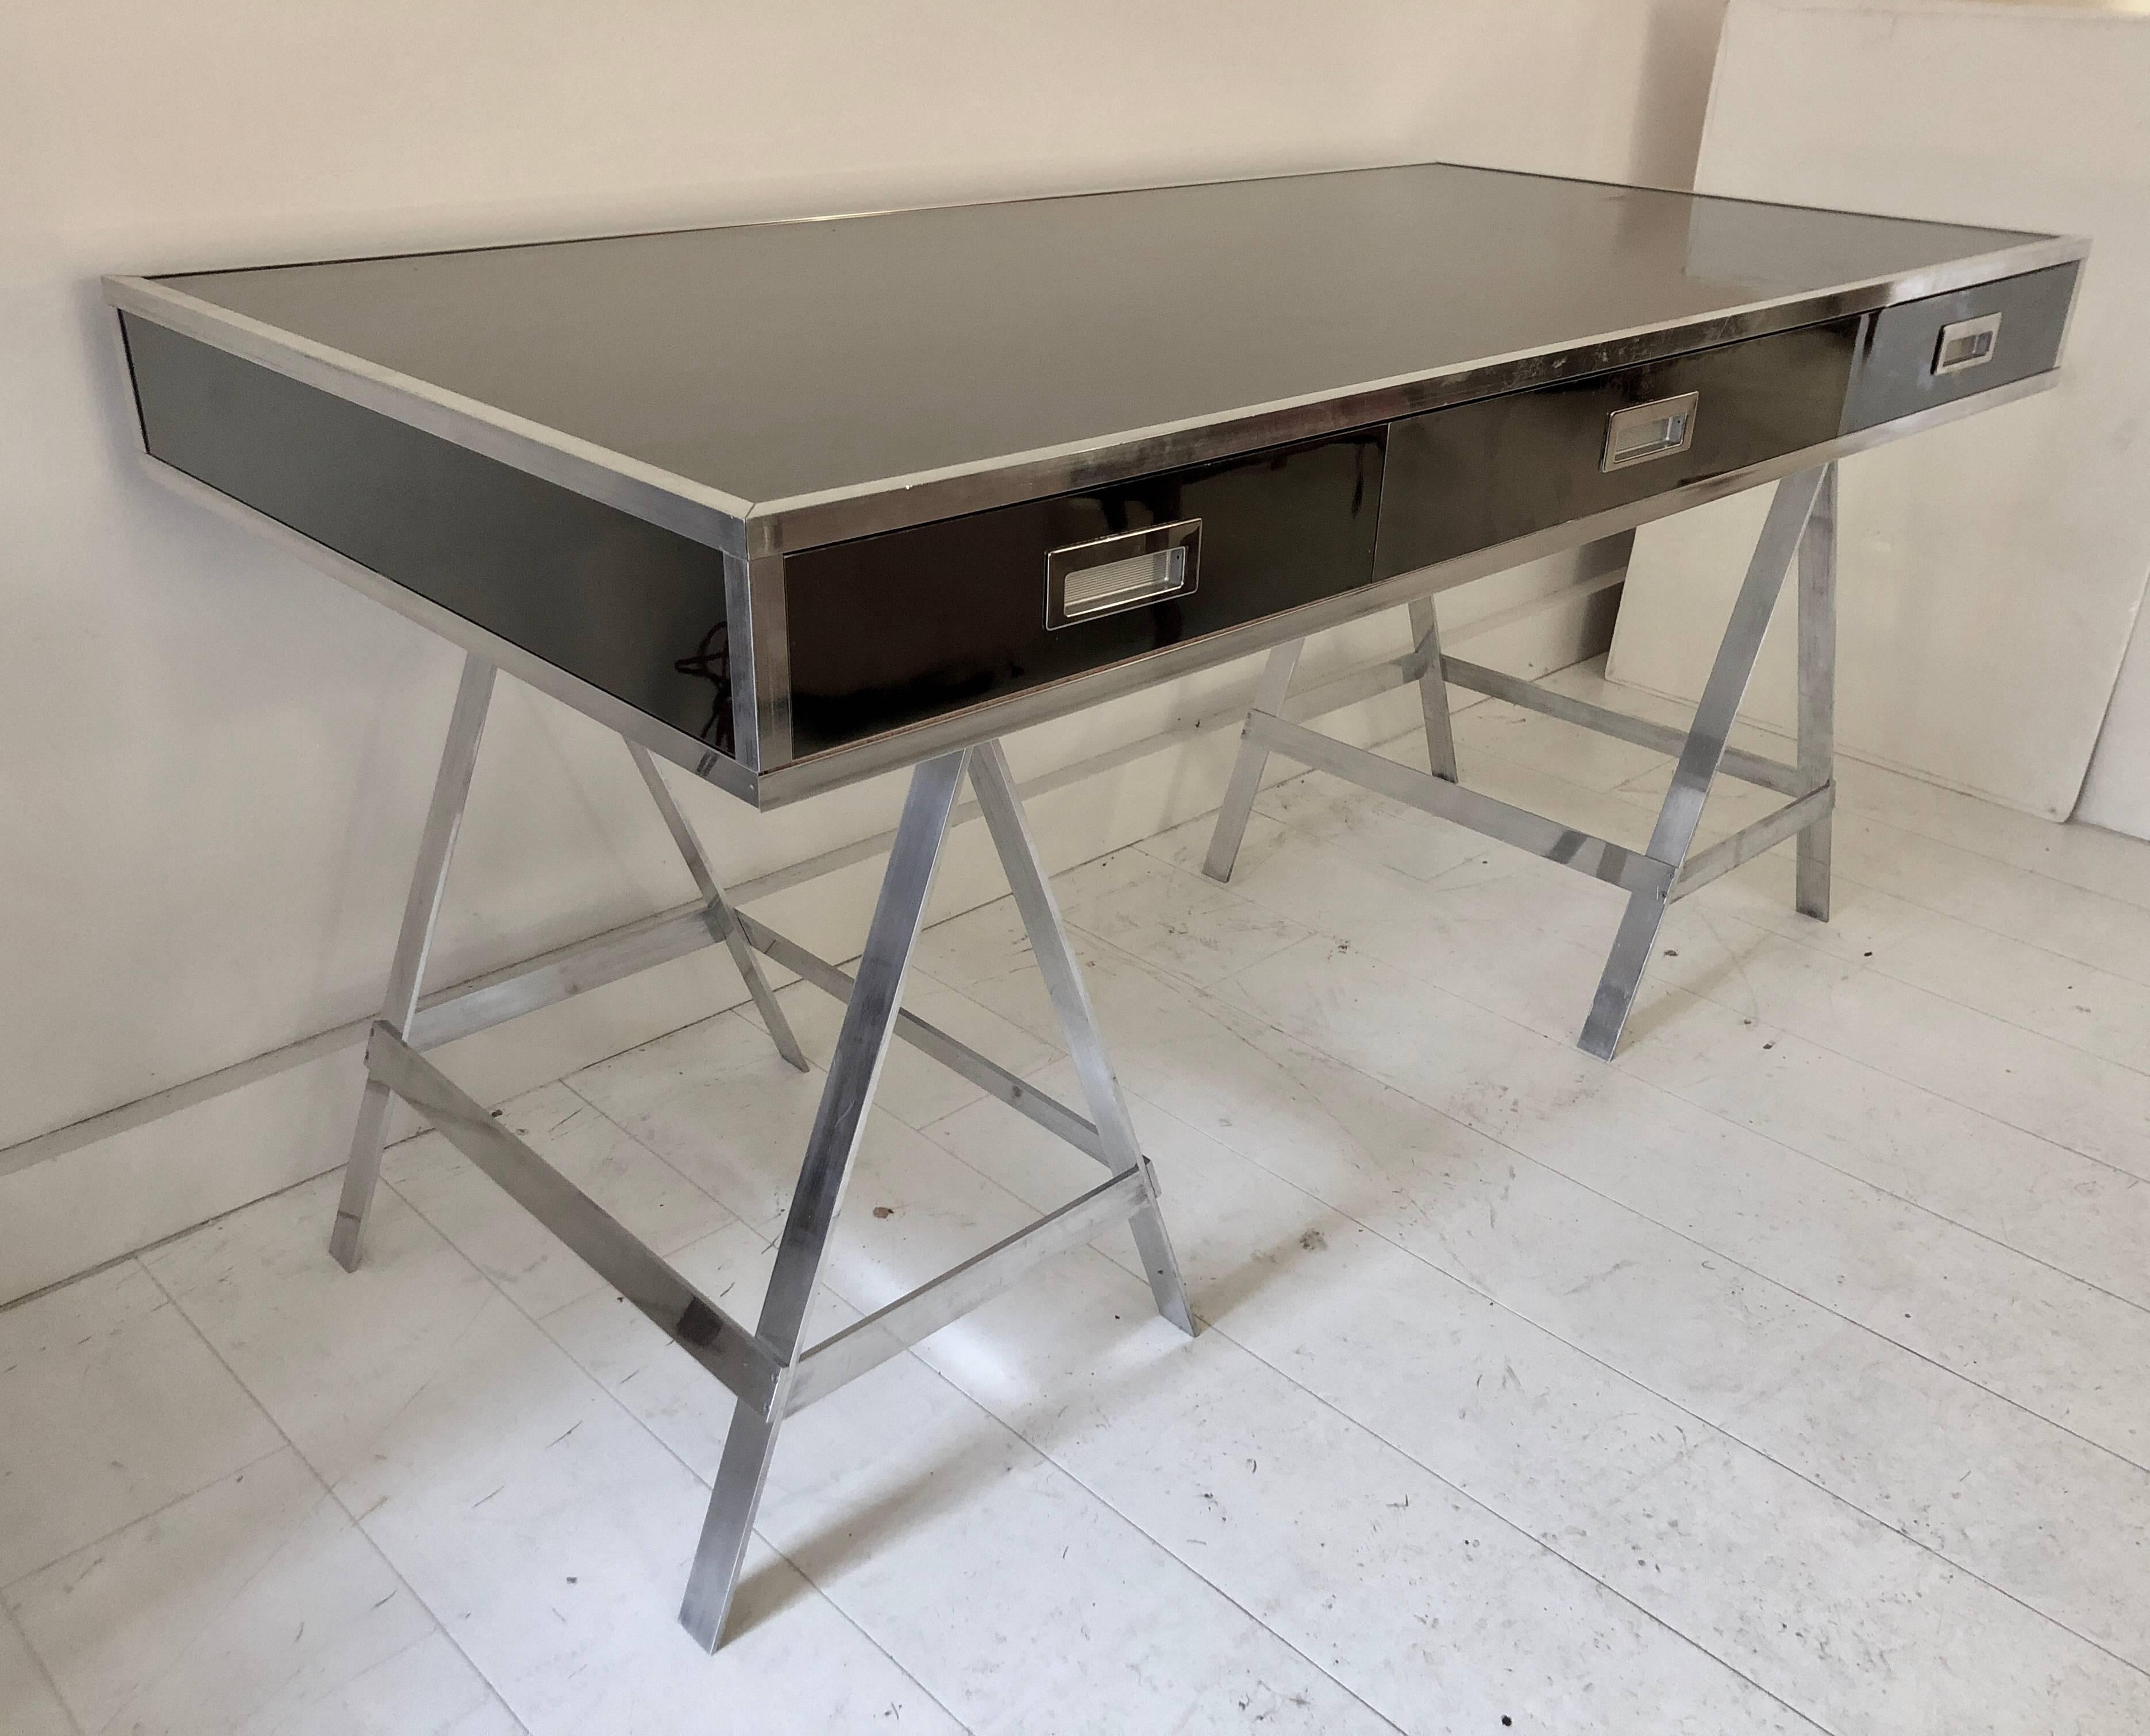 Example of the Classic Albrizzi trestle desk in polished aluminium and mirrored chrome finish, circa 1970. Three dovetailed drawers with inset pulls raised on sawhorse legs. Unsigned.